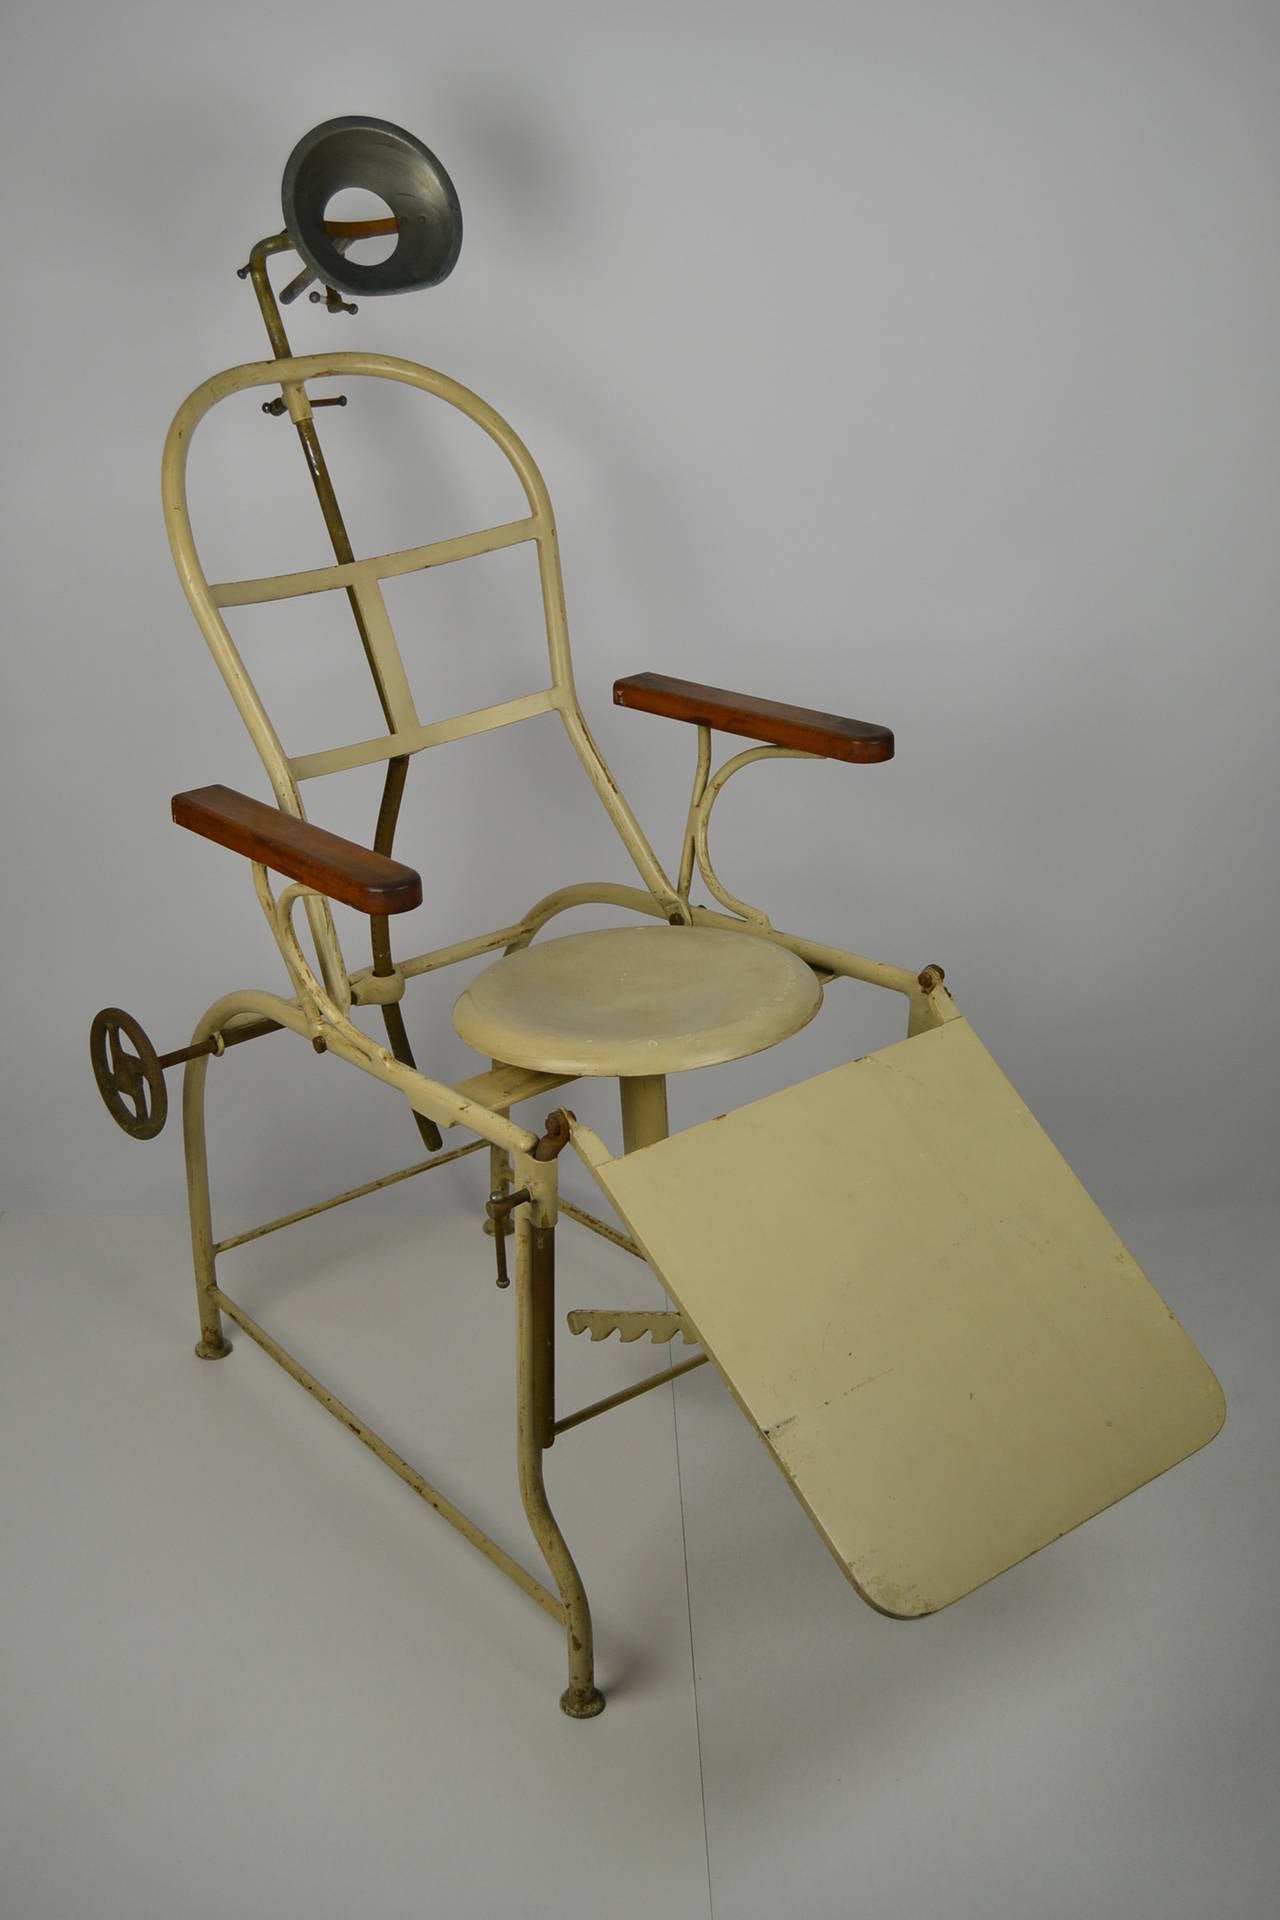 Real curiosity, antique portable medical chair, circa 1920. Exam or surgical chair for ophthalmologist or dentist, vintage hospital or doctor's equipment, cast iron, enamel painted, wooden armrests, headrest, seating and back adjustable.
Complete